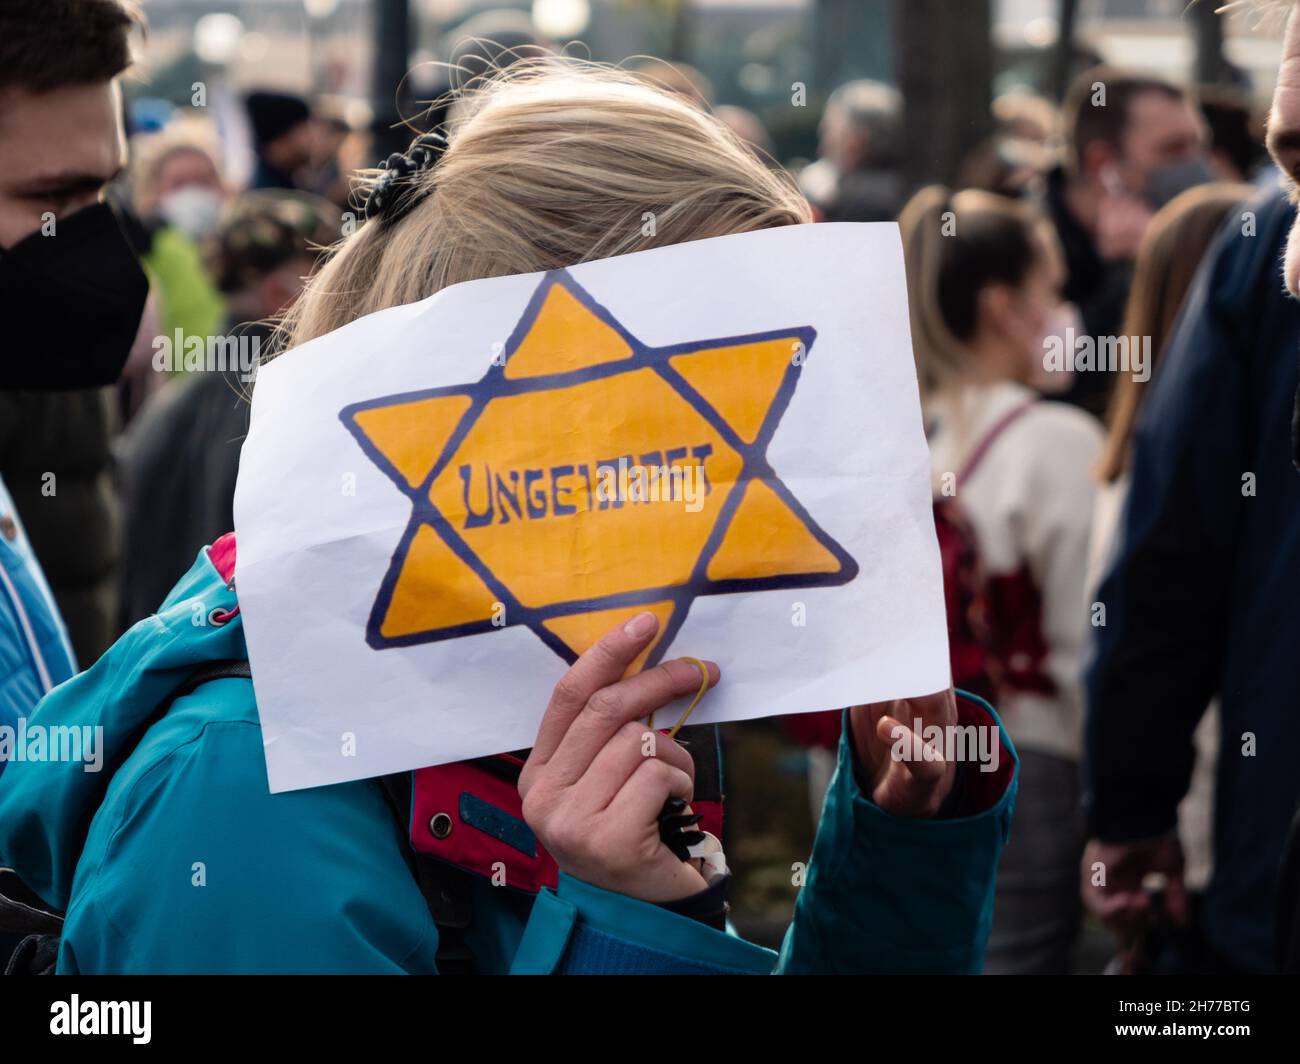 Vienna, Austria - November 20 2021: Anti-Vax Covid-19 Demonstrator Holdig Sign 'Ungeimpft' or 'Unvaccinated' in a Yellow Patch or Jewish Badge Star of Stock Photo